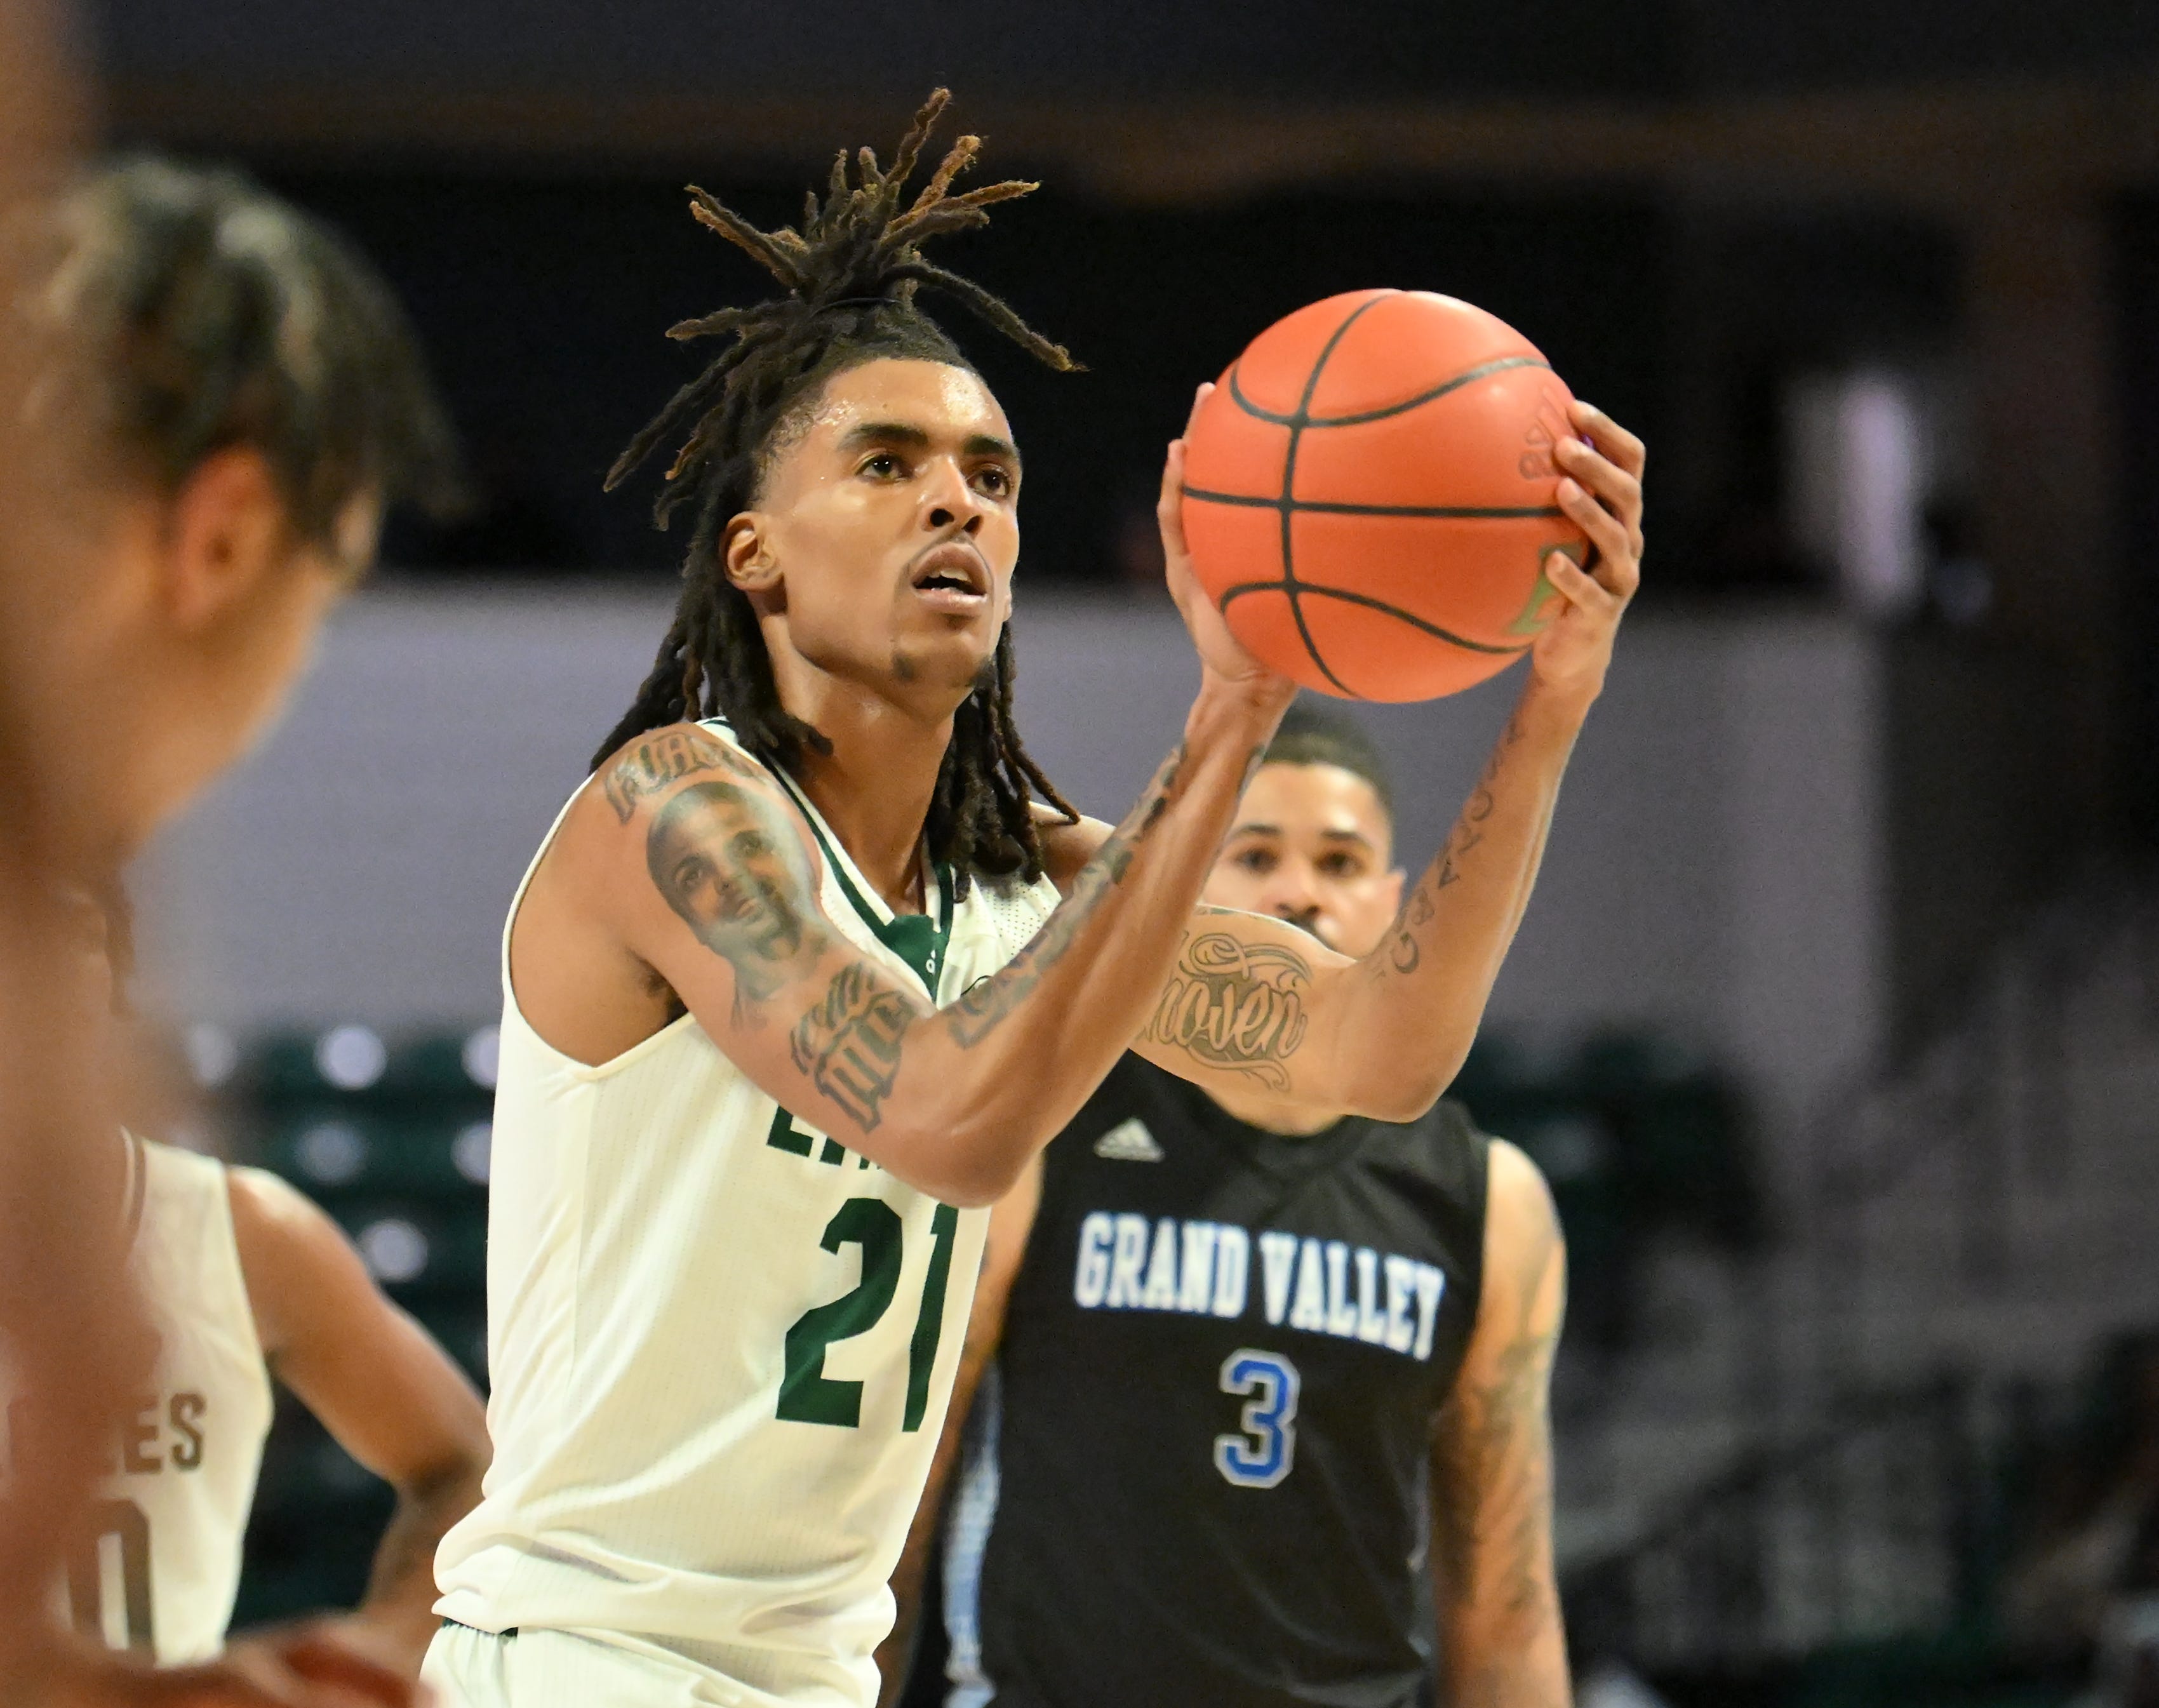 Eastern guard Emoni Bates shoots a free throw in the first half.  Eastern vs Grand Valley in men's basketball exhibition at George Gervin GameAbove Center at Eastern Michigan University in Ypsilanti, Mich. on Oct. 27, 2022.  
(Robin Buckson / The Detroit News)